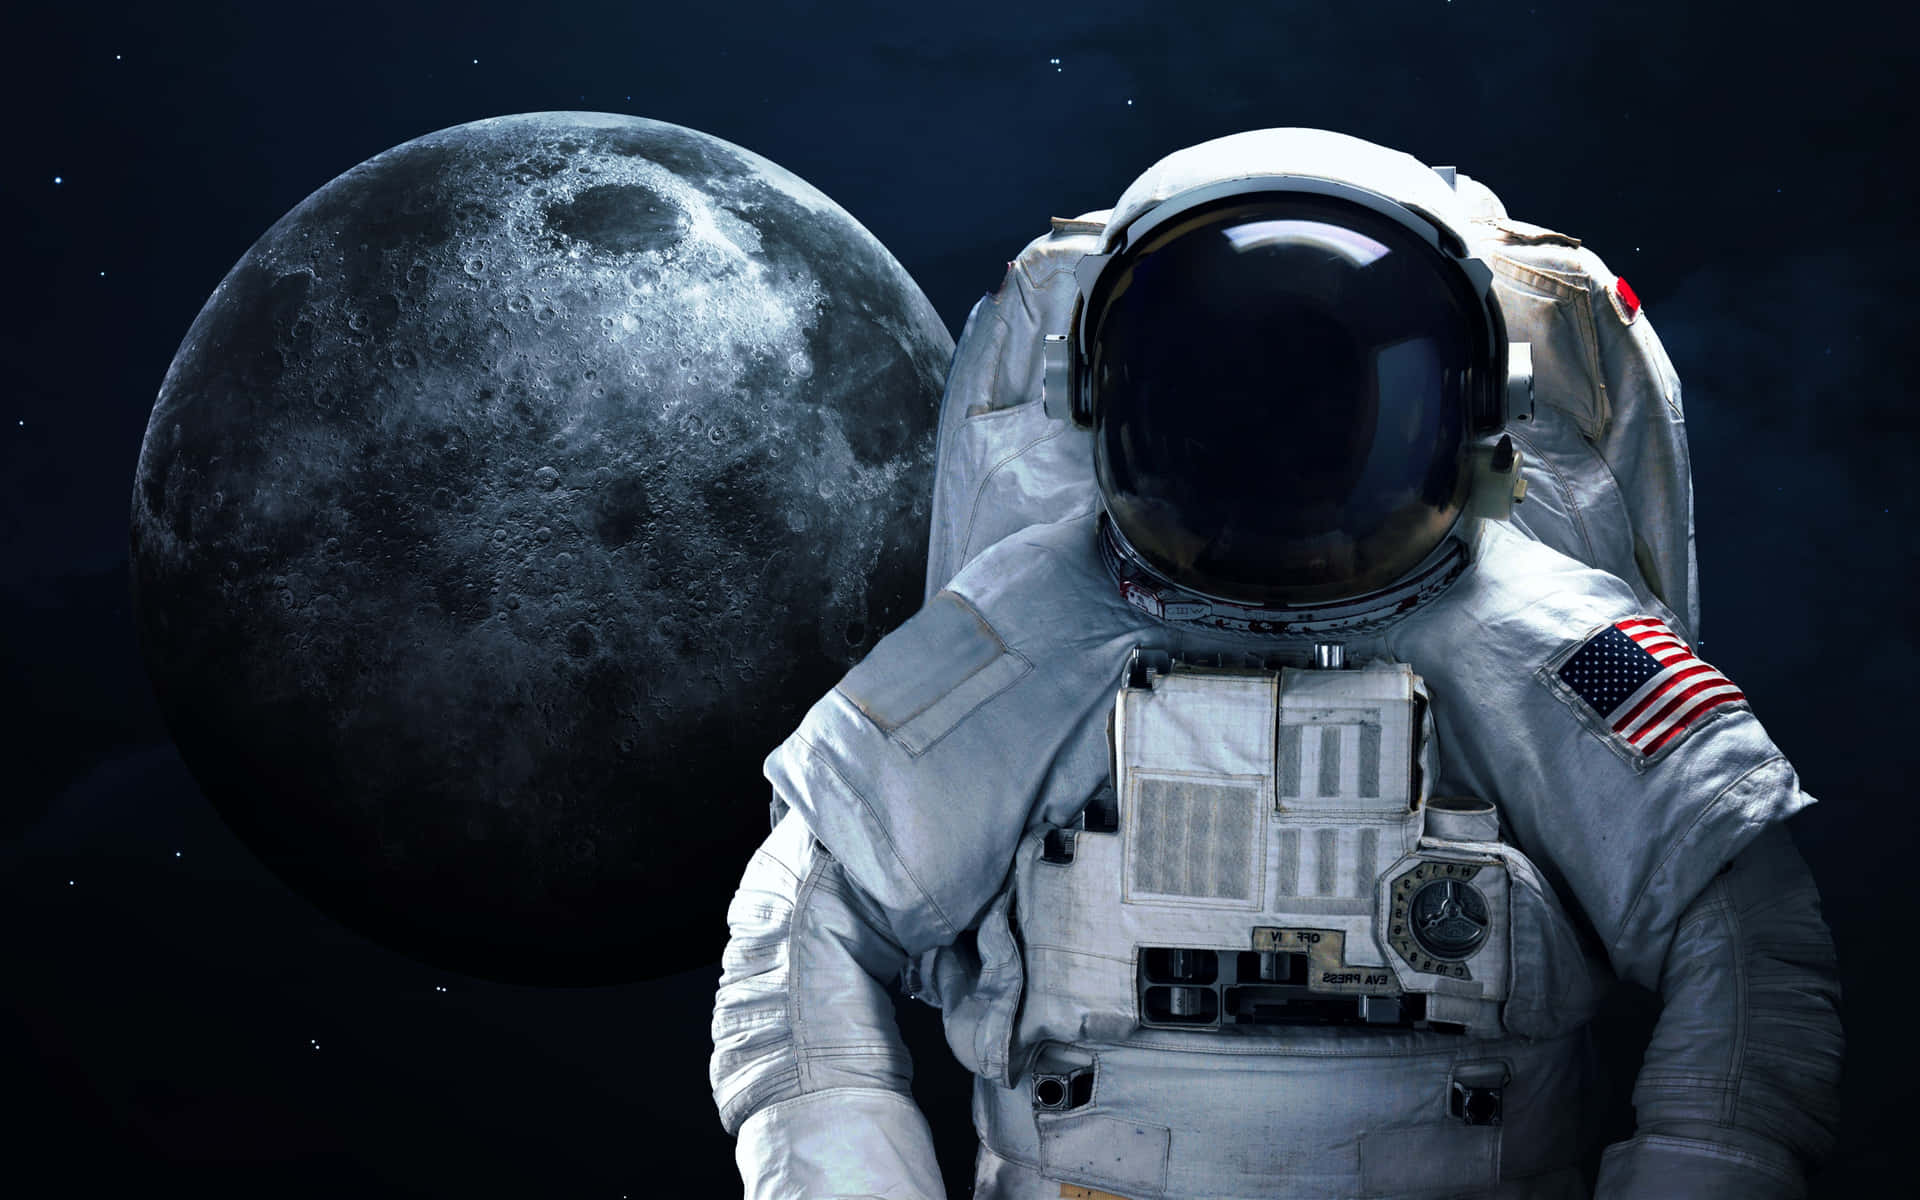 An amazing astronaut with an inspiring view of the universe Wallpaper